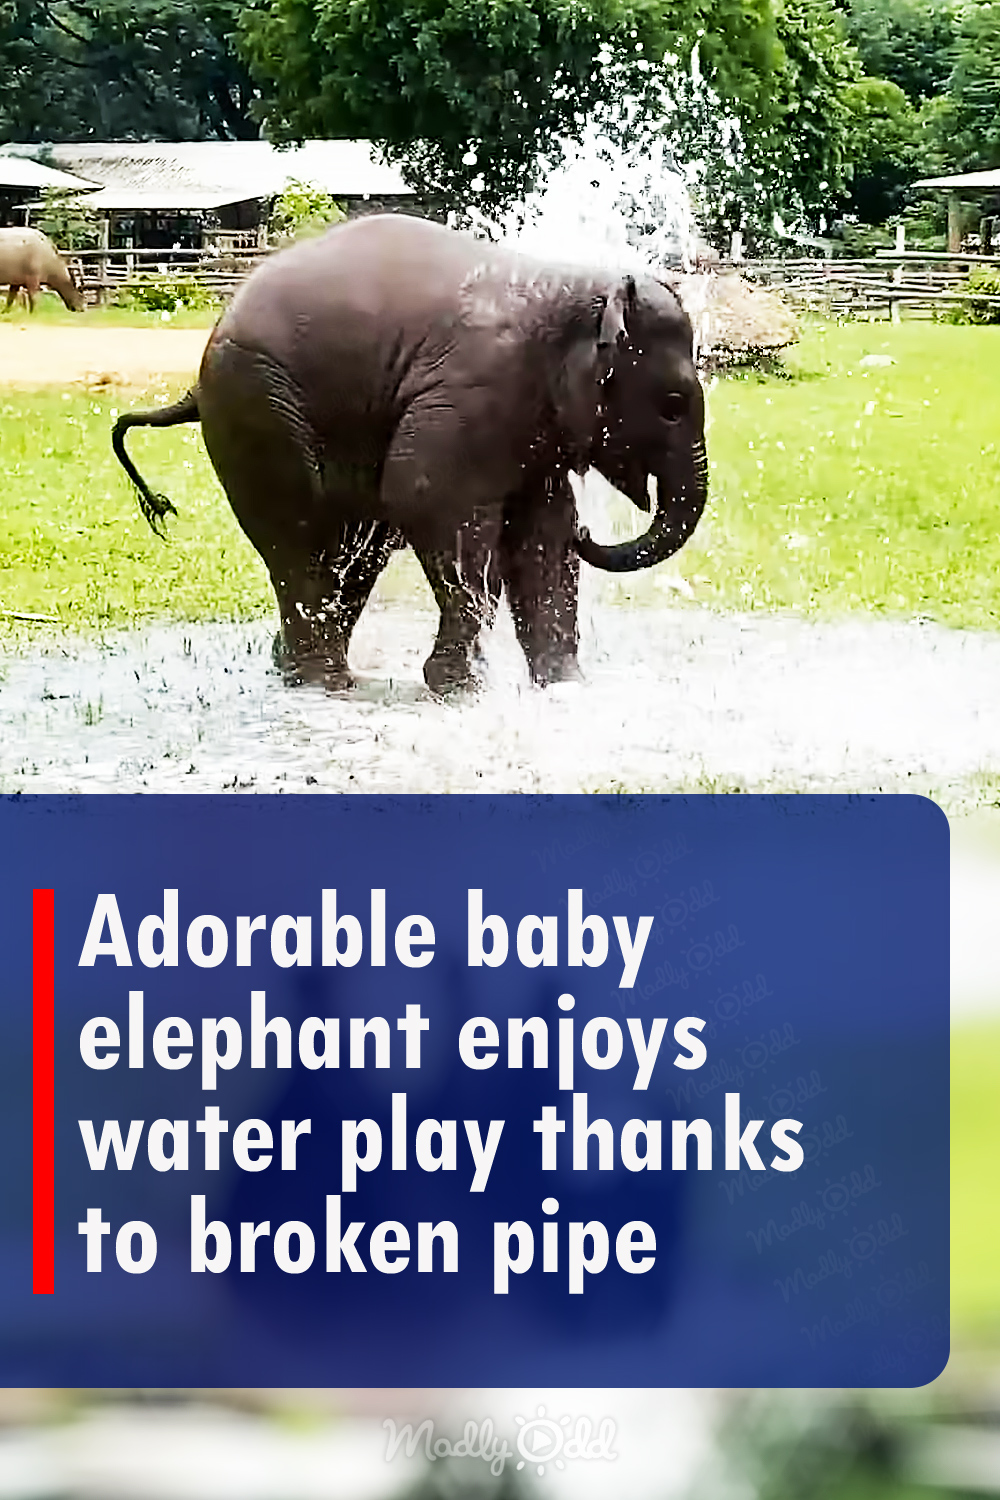 Adorable baby elephant enjoys water play thanks to broken pipe